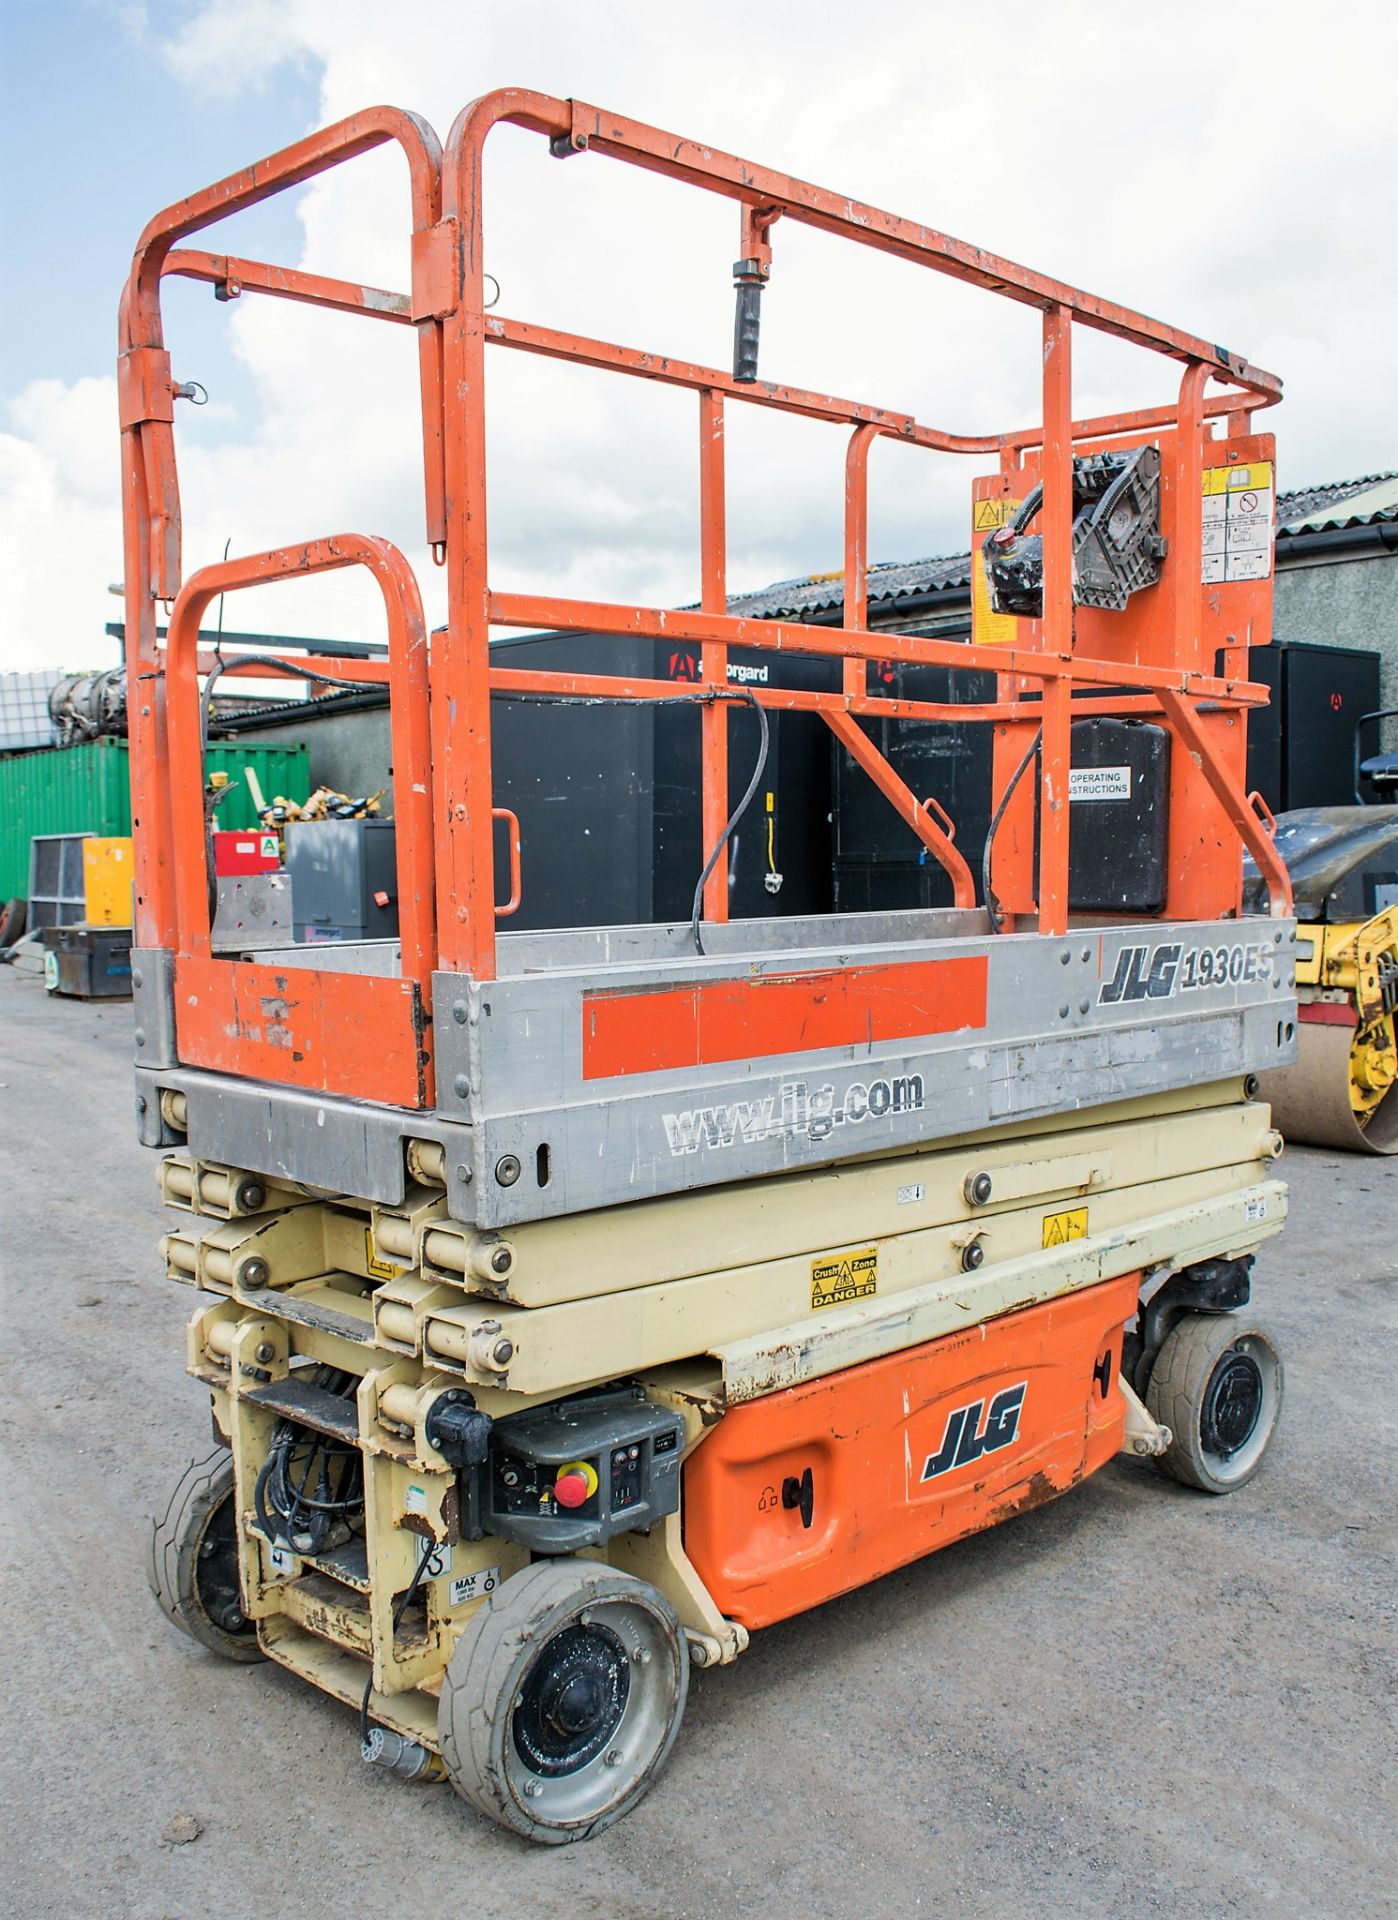 JLG 1930ES 19ft battery electric scissor lift access platform Year: 2003 S/N: 113766 Recorded hours: